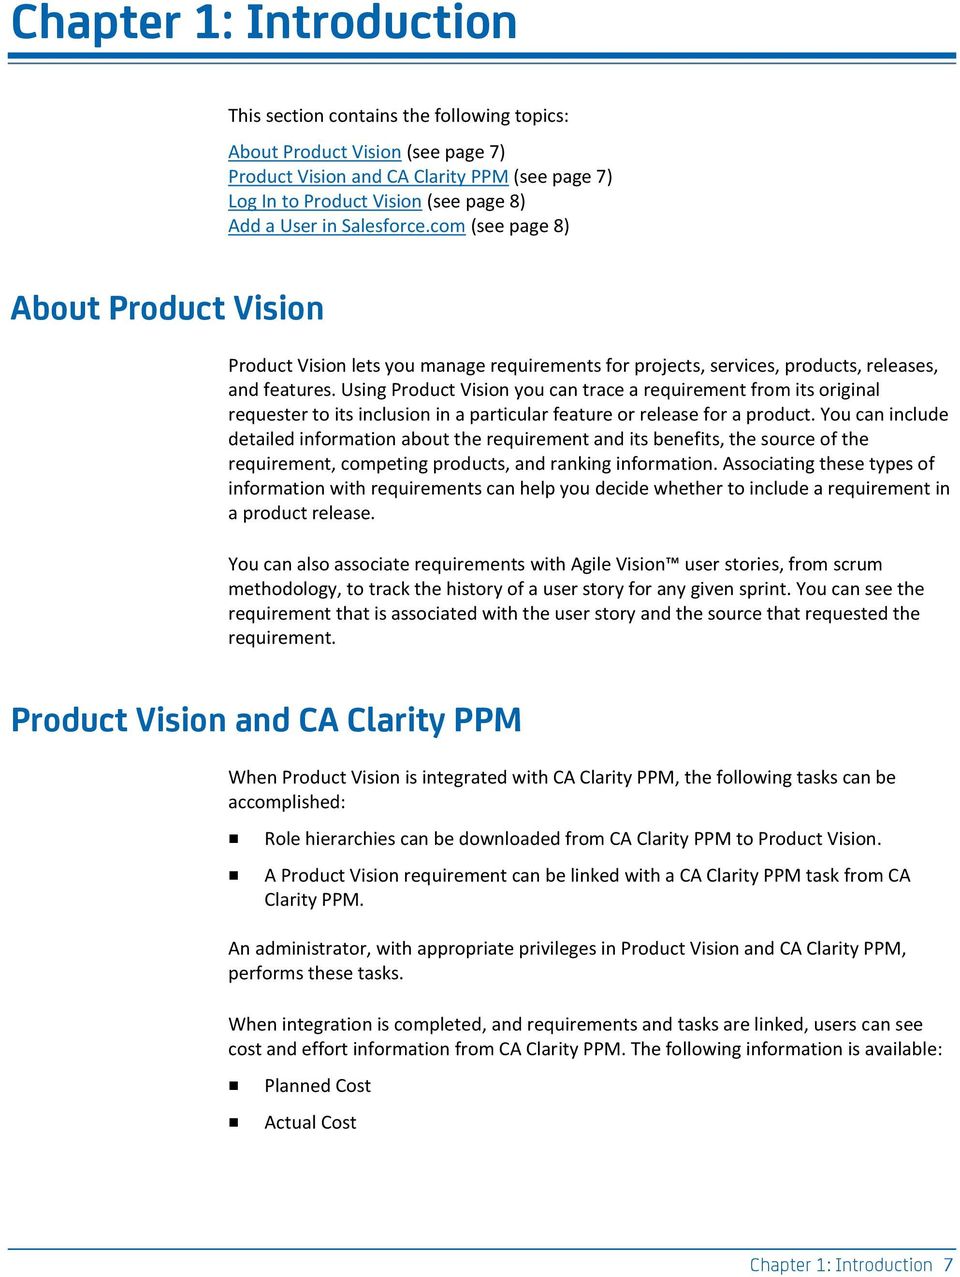 Using Product Vision you can trace a requirement from its original requester to its inclusion in a particular feature or release for a product.